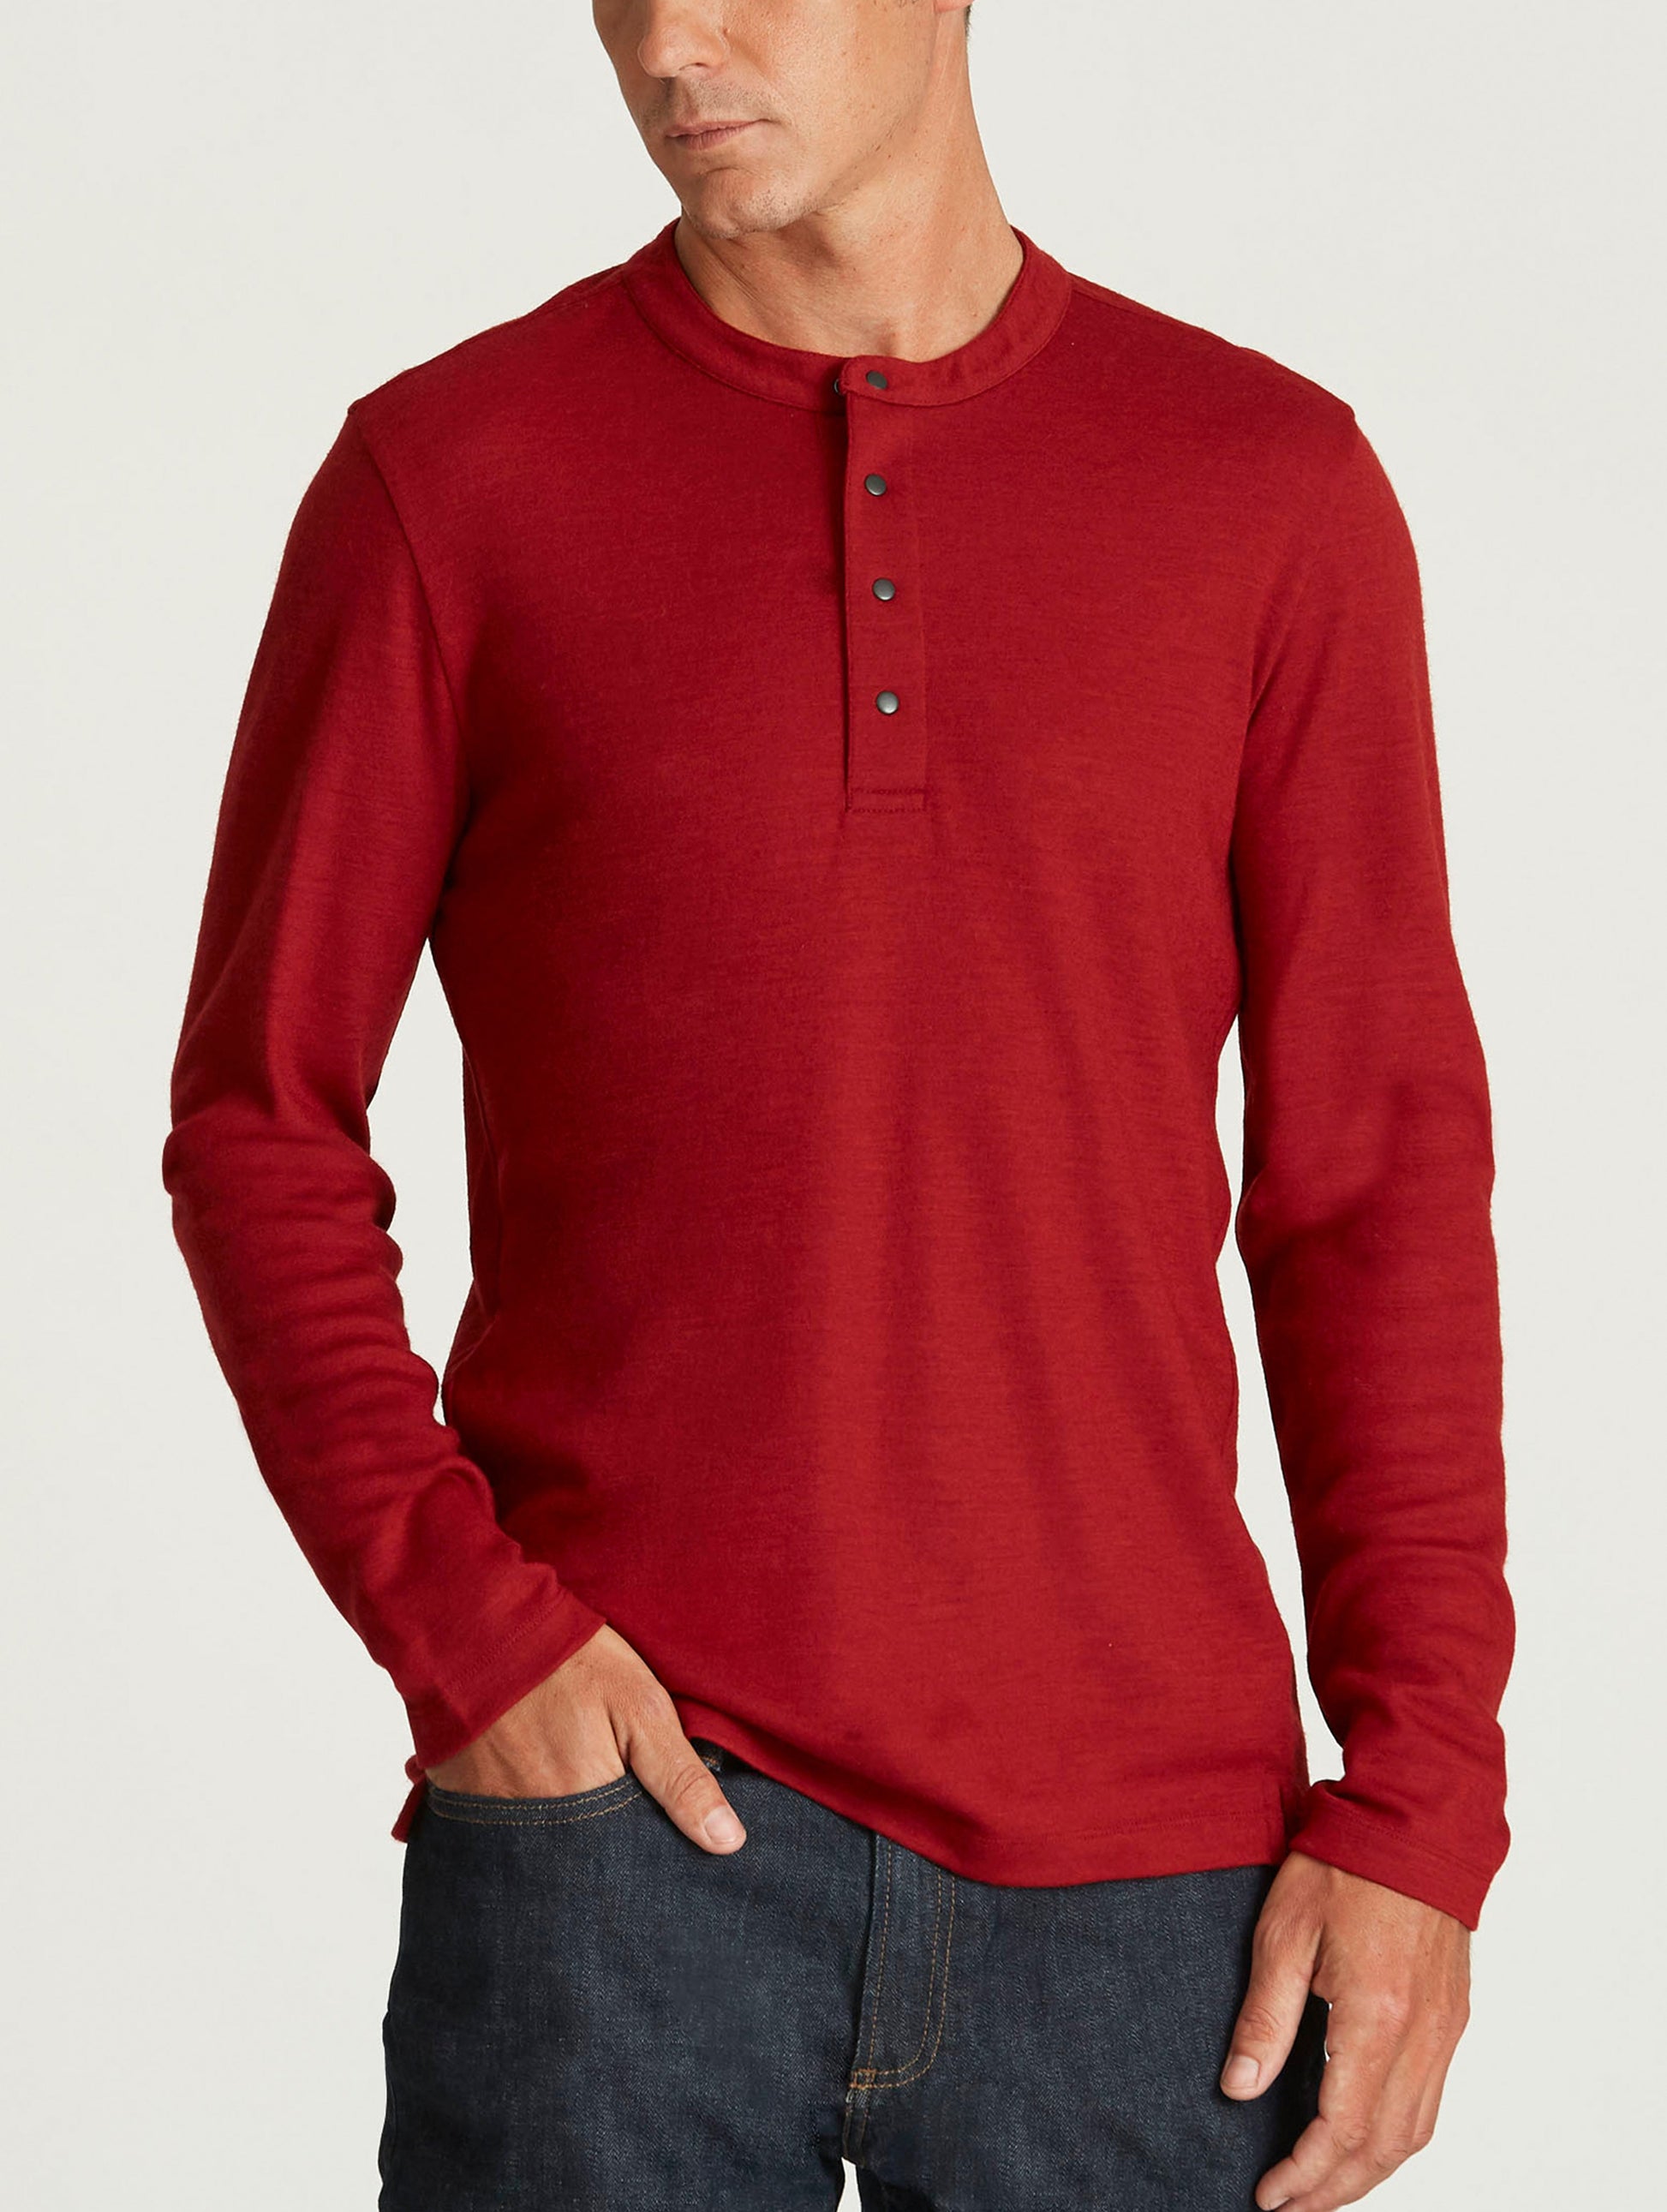 henley shirt for men from Aether Apparel